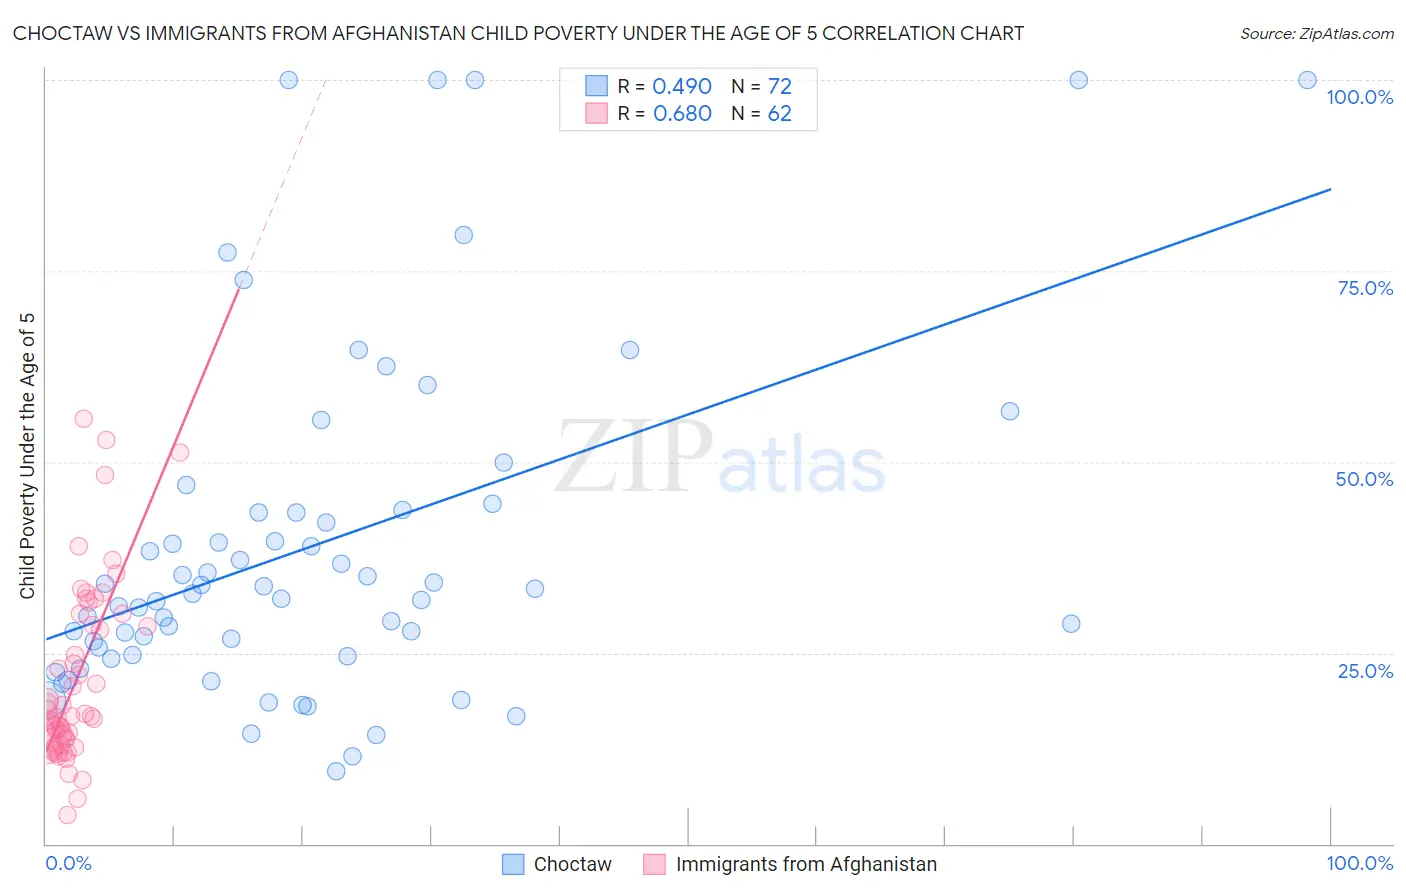 Choctaw vs Immigrants from Afghanistan Child Poverty Under the Age of 5